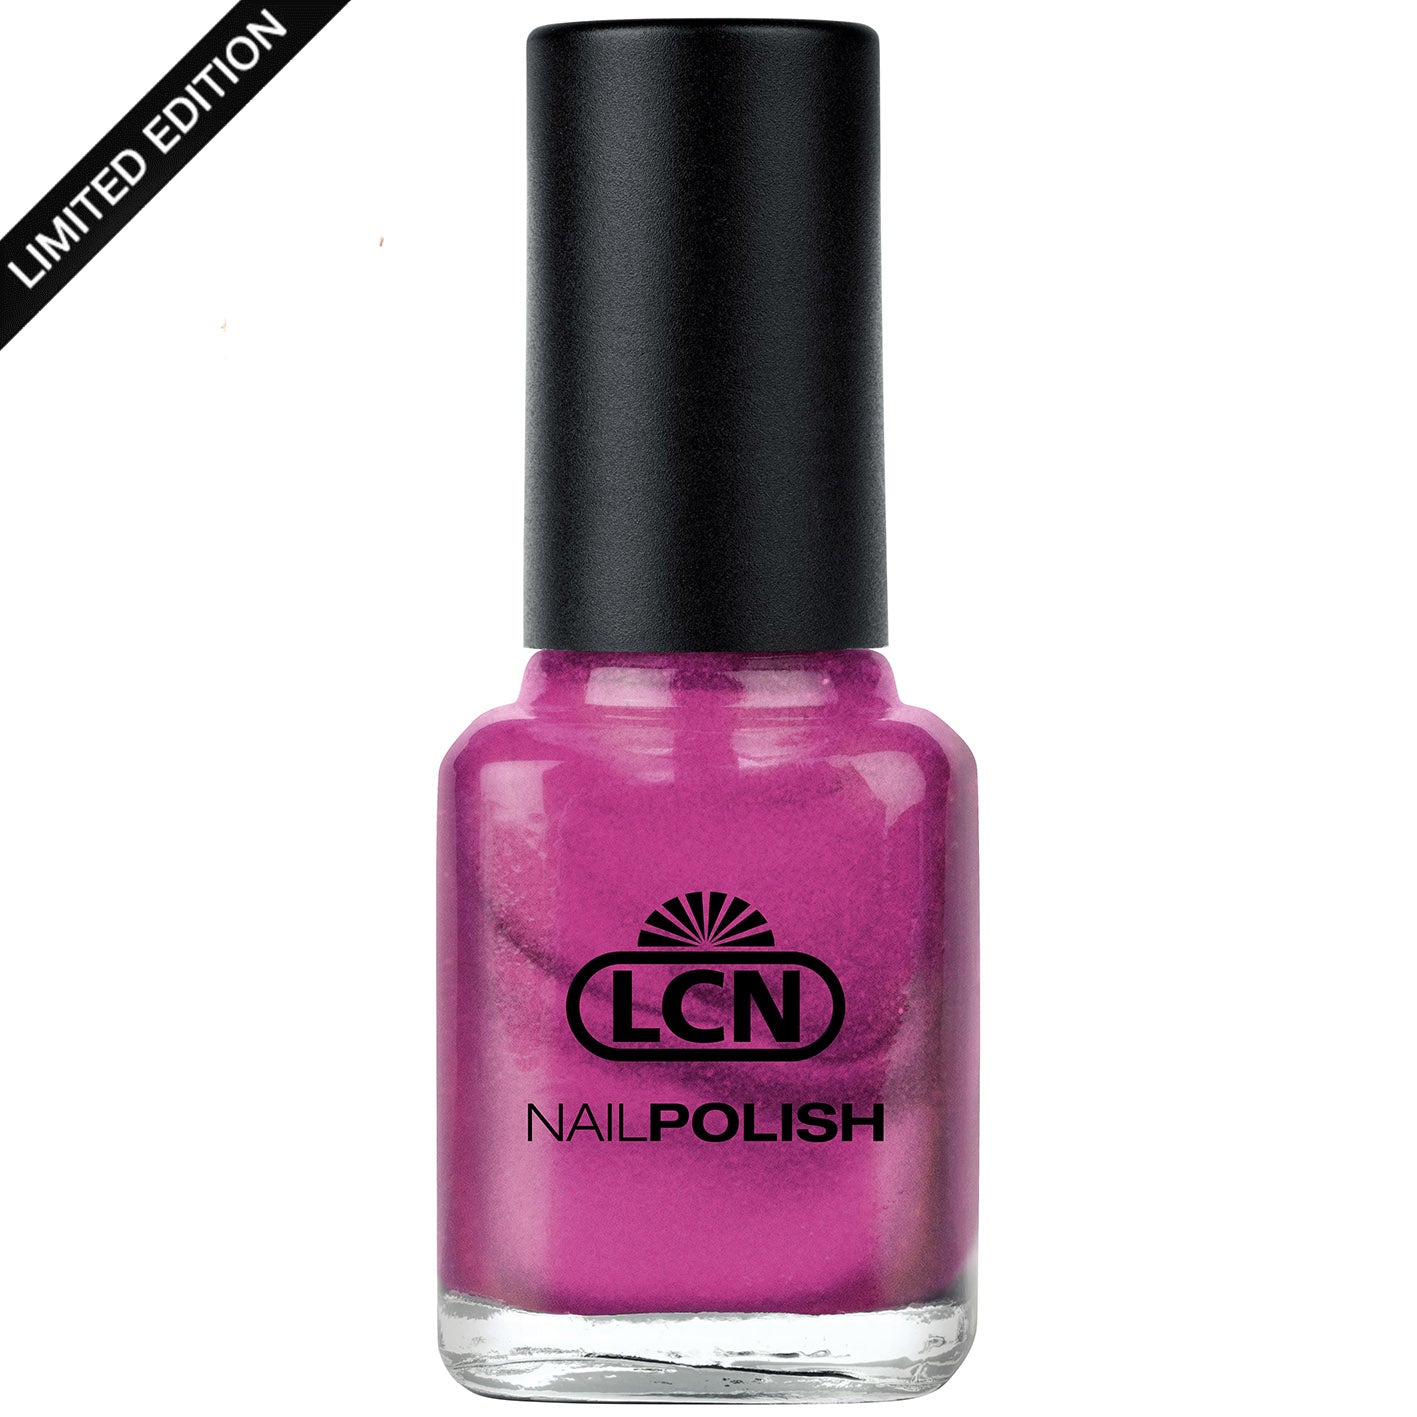 450 - Can't get Past My Reflection Nail Polish 8ml*